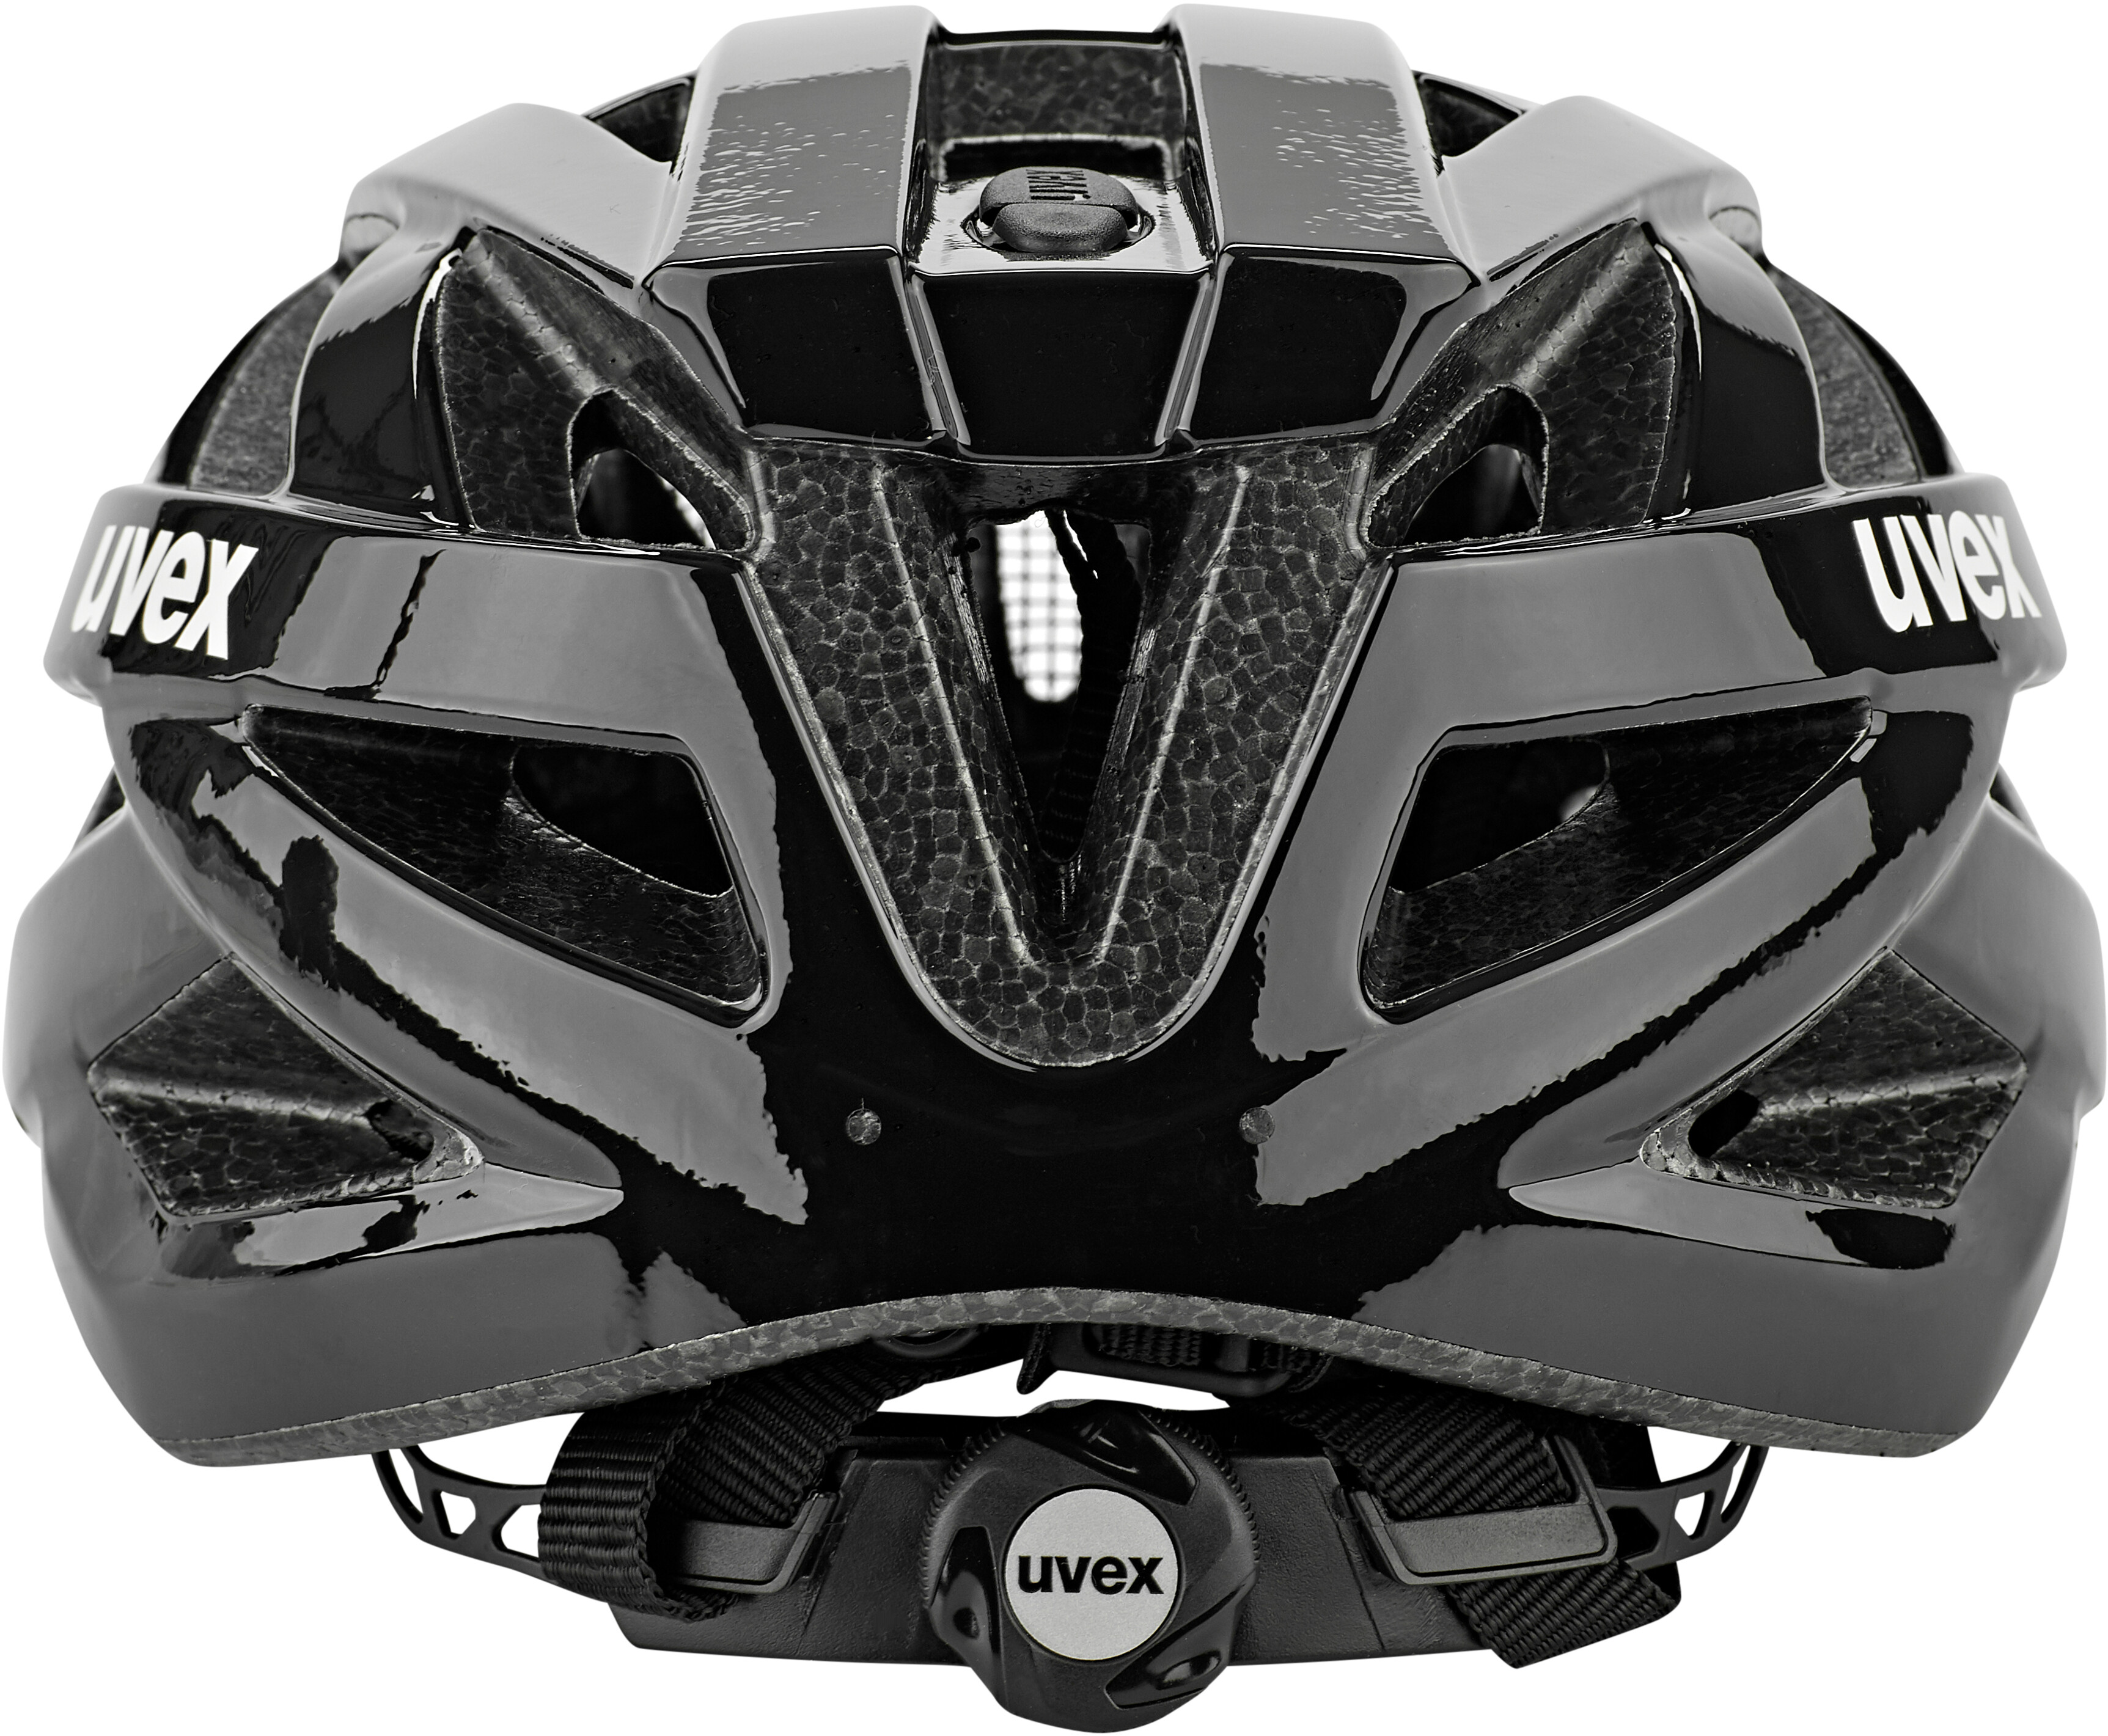 Kask rowerowy Uvex i-vo 3D